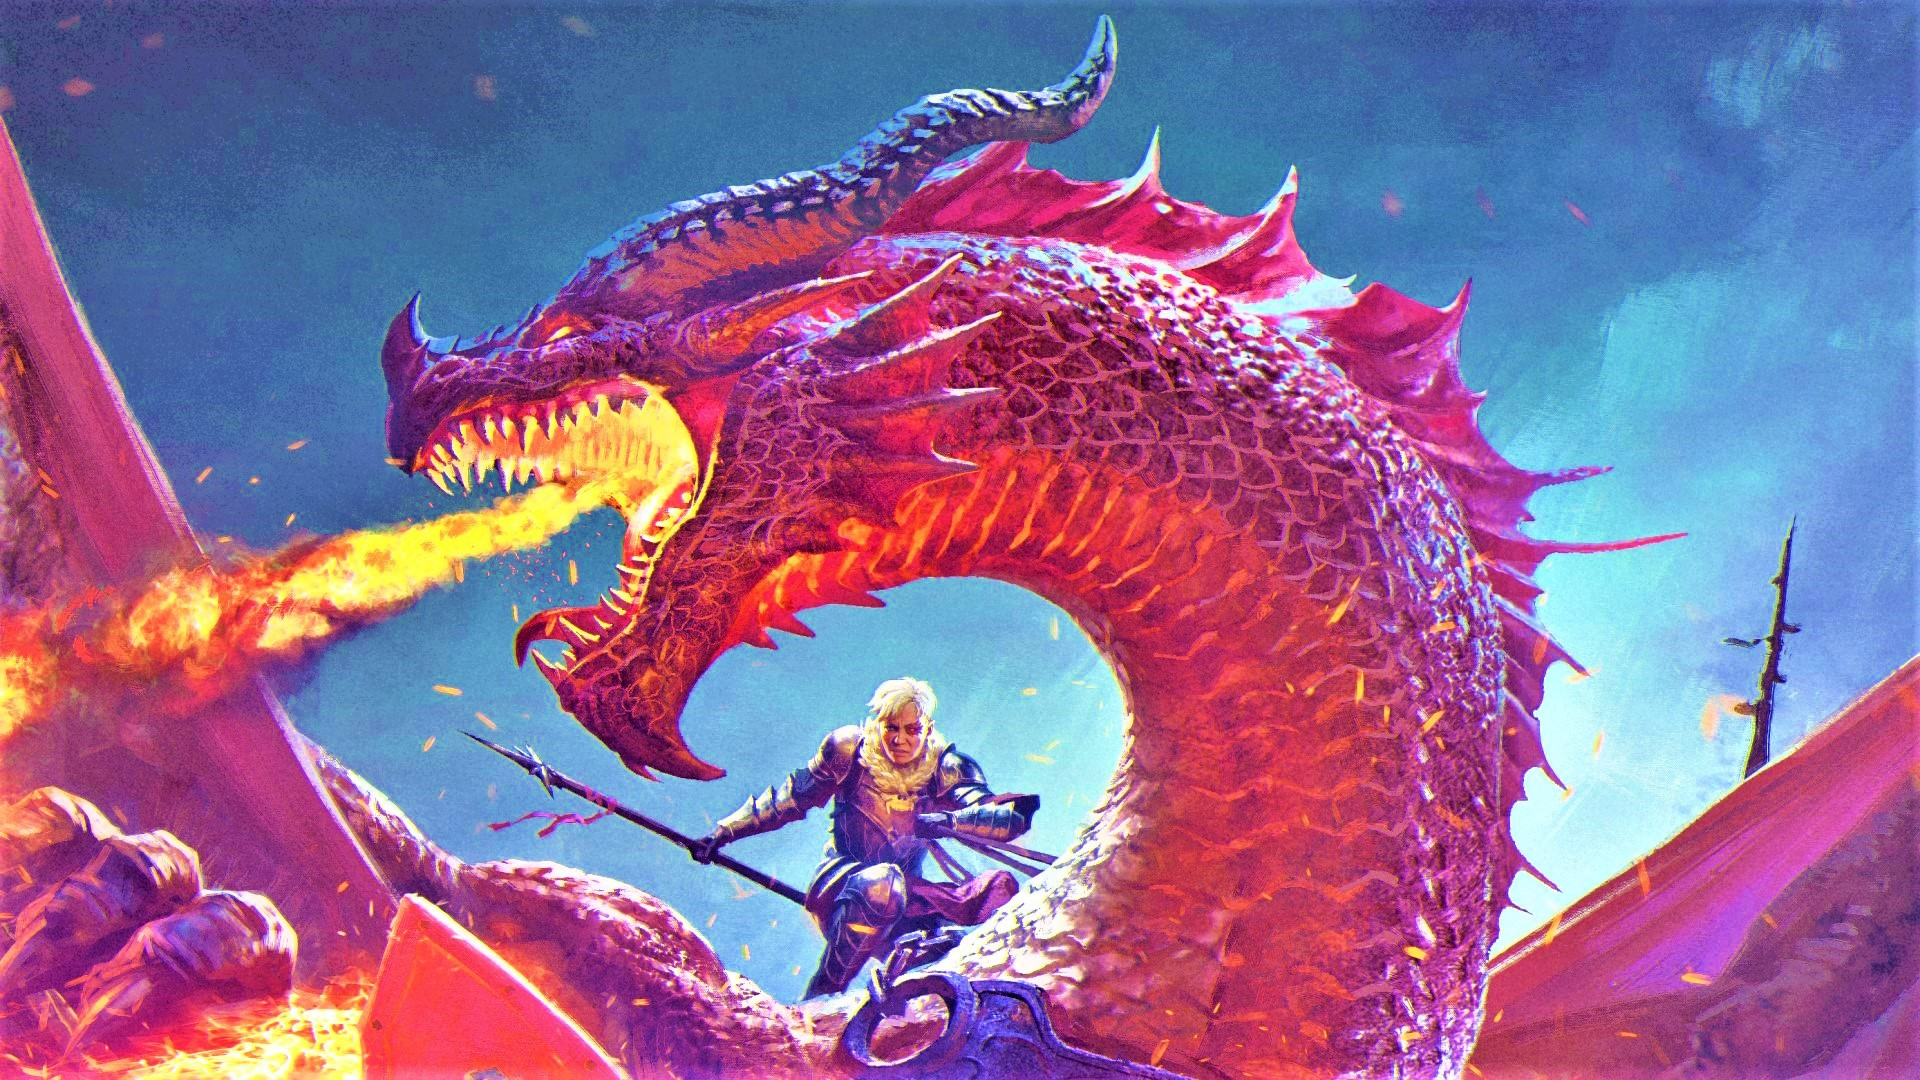 One D&D: Dungeons & Dragons Dropping 'Editions', Developing VTT